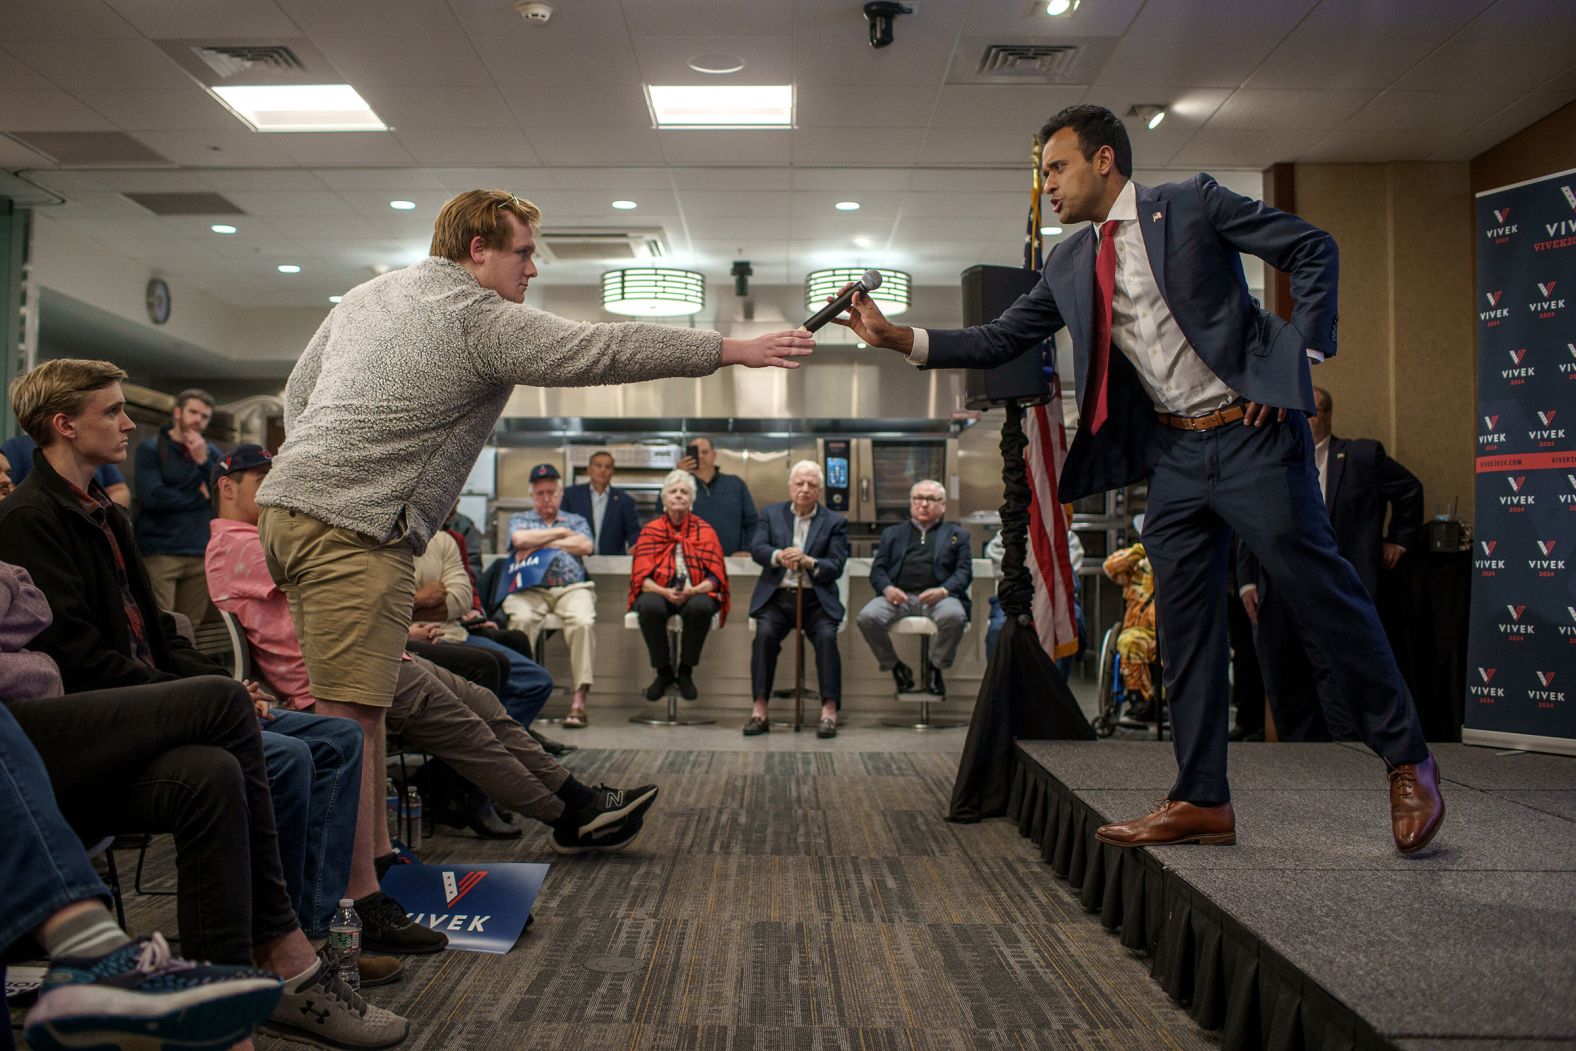 Ramaswamy hands the microphone to Walter Waligura for a question during a campaign event in Windham, New Hampshire, in May 2023.